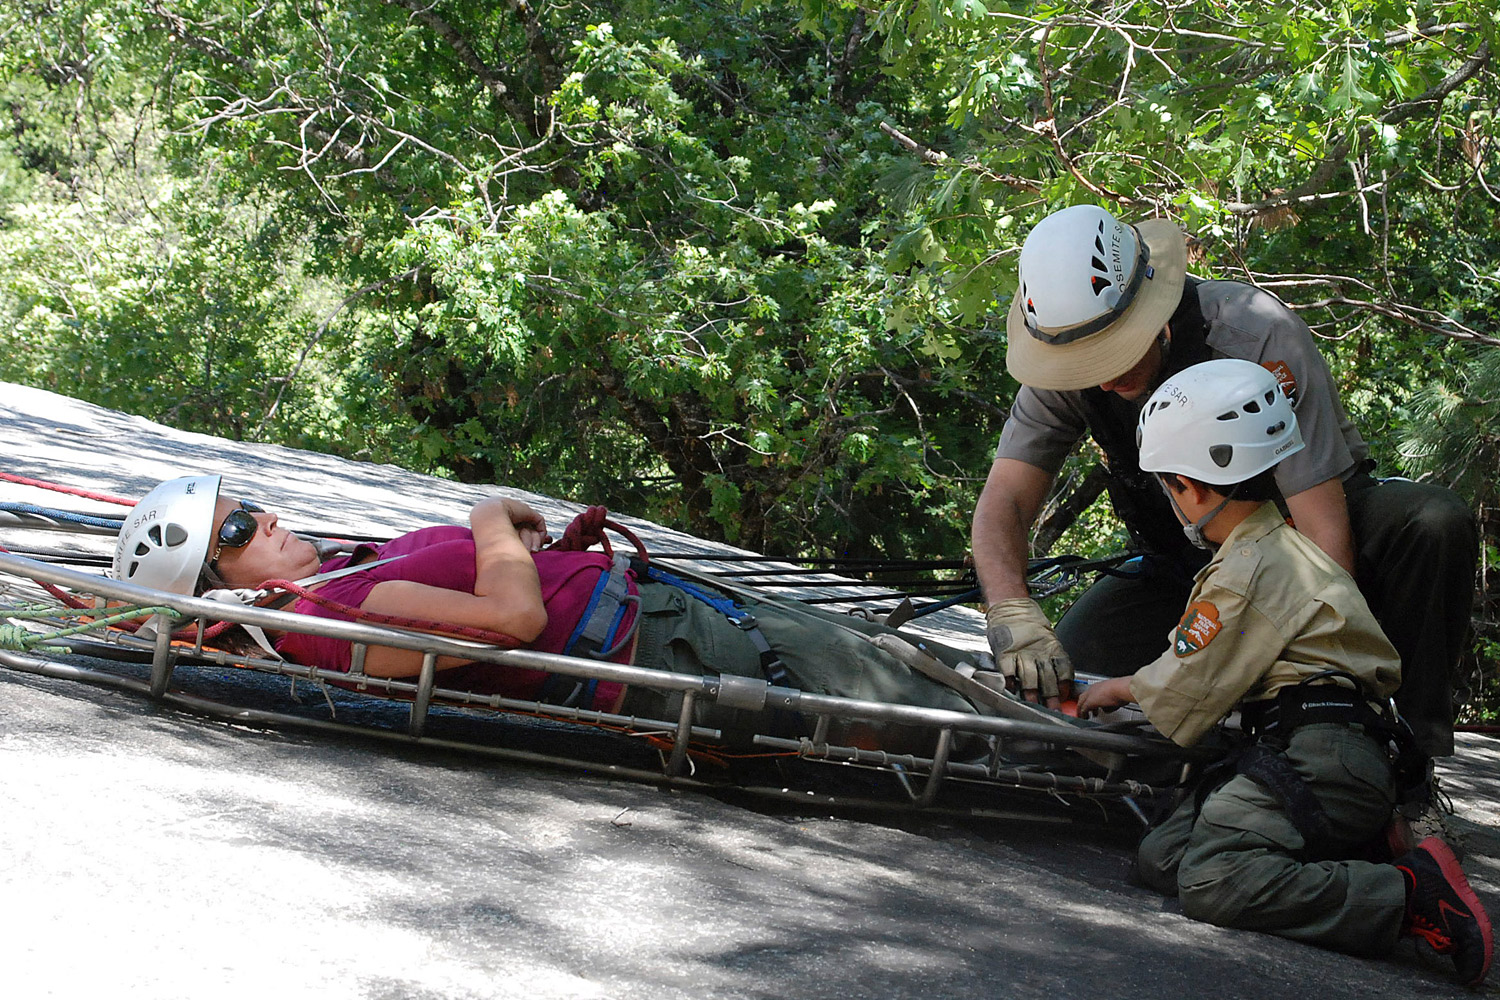 Gabriel LaVon Ying, right, learning how to assist an injured hiker during a simulated search and rescue operation with the Yosemite medical team. (National Park Service / AP)